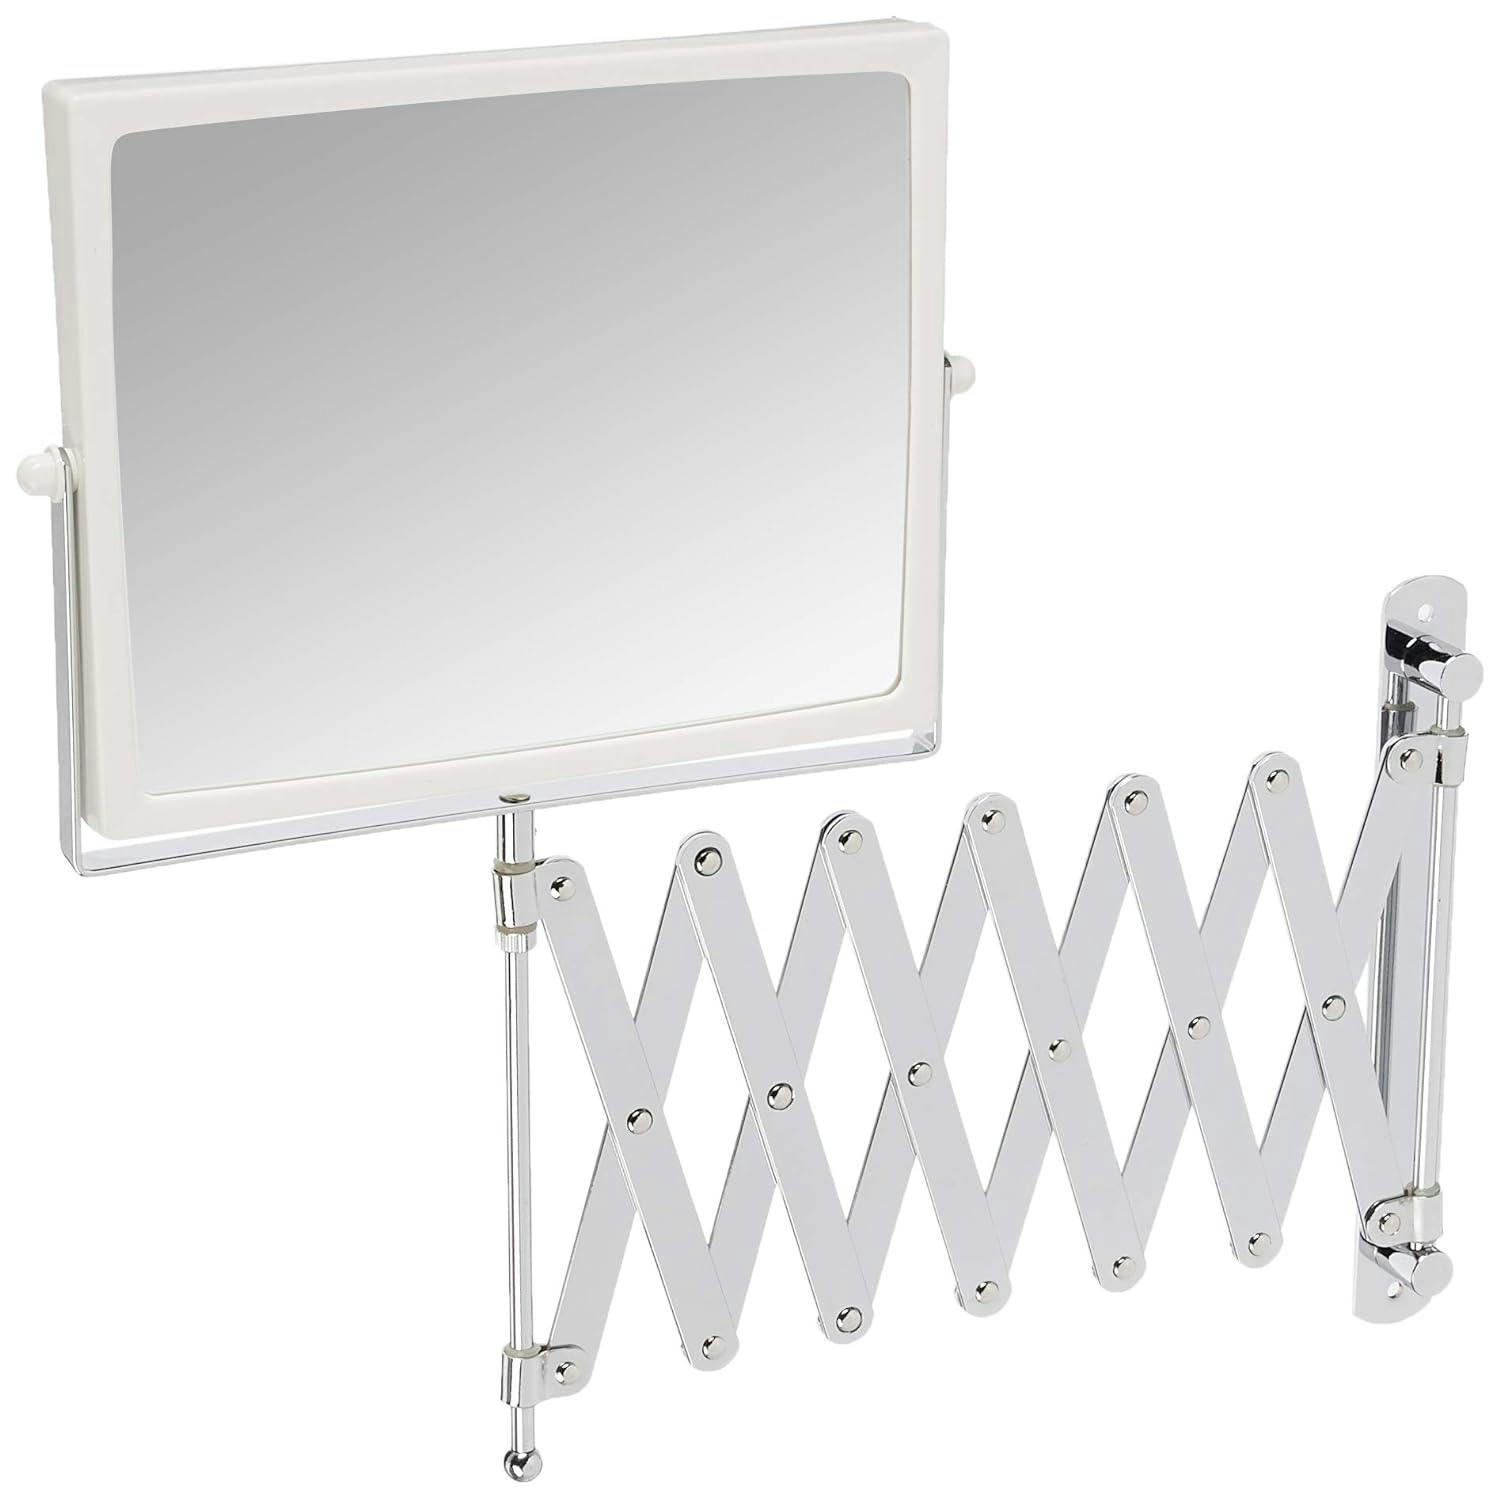 Elegant Wall-Mounted Rectangular Magnifying Mirror with Swivel Design, White and Chrome